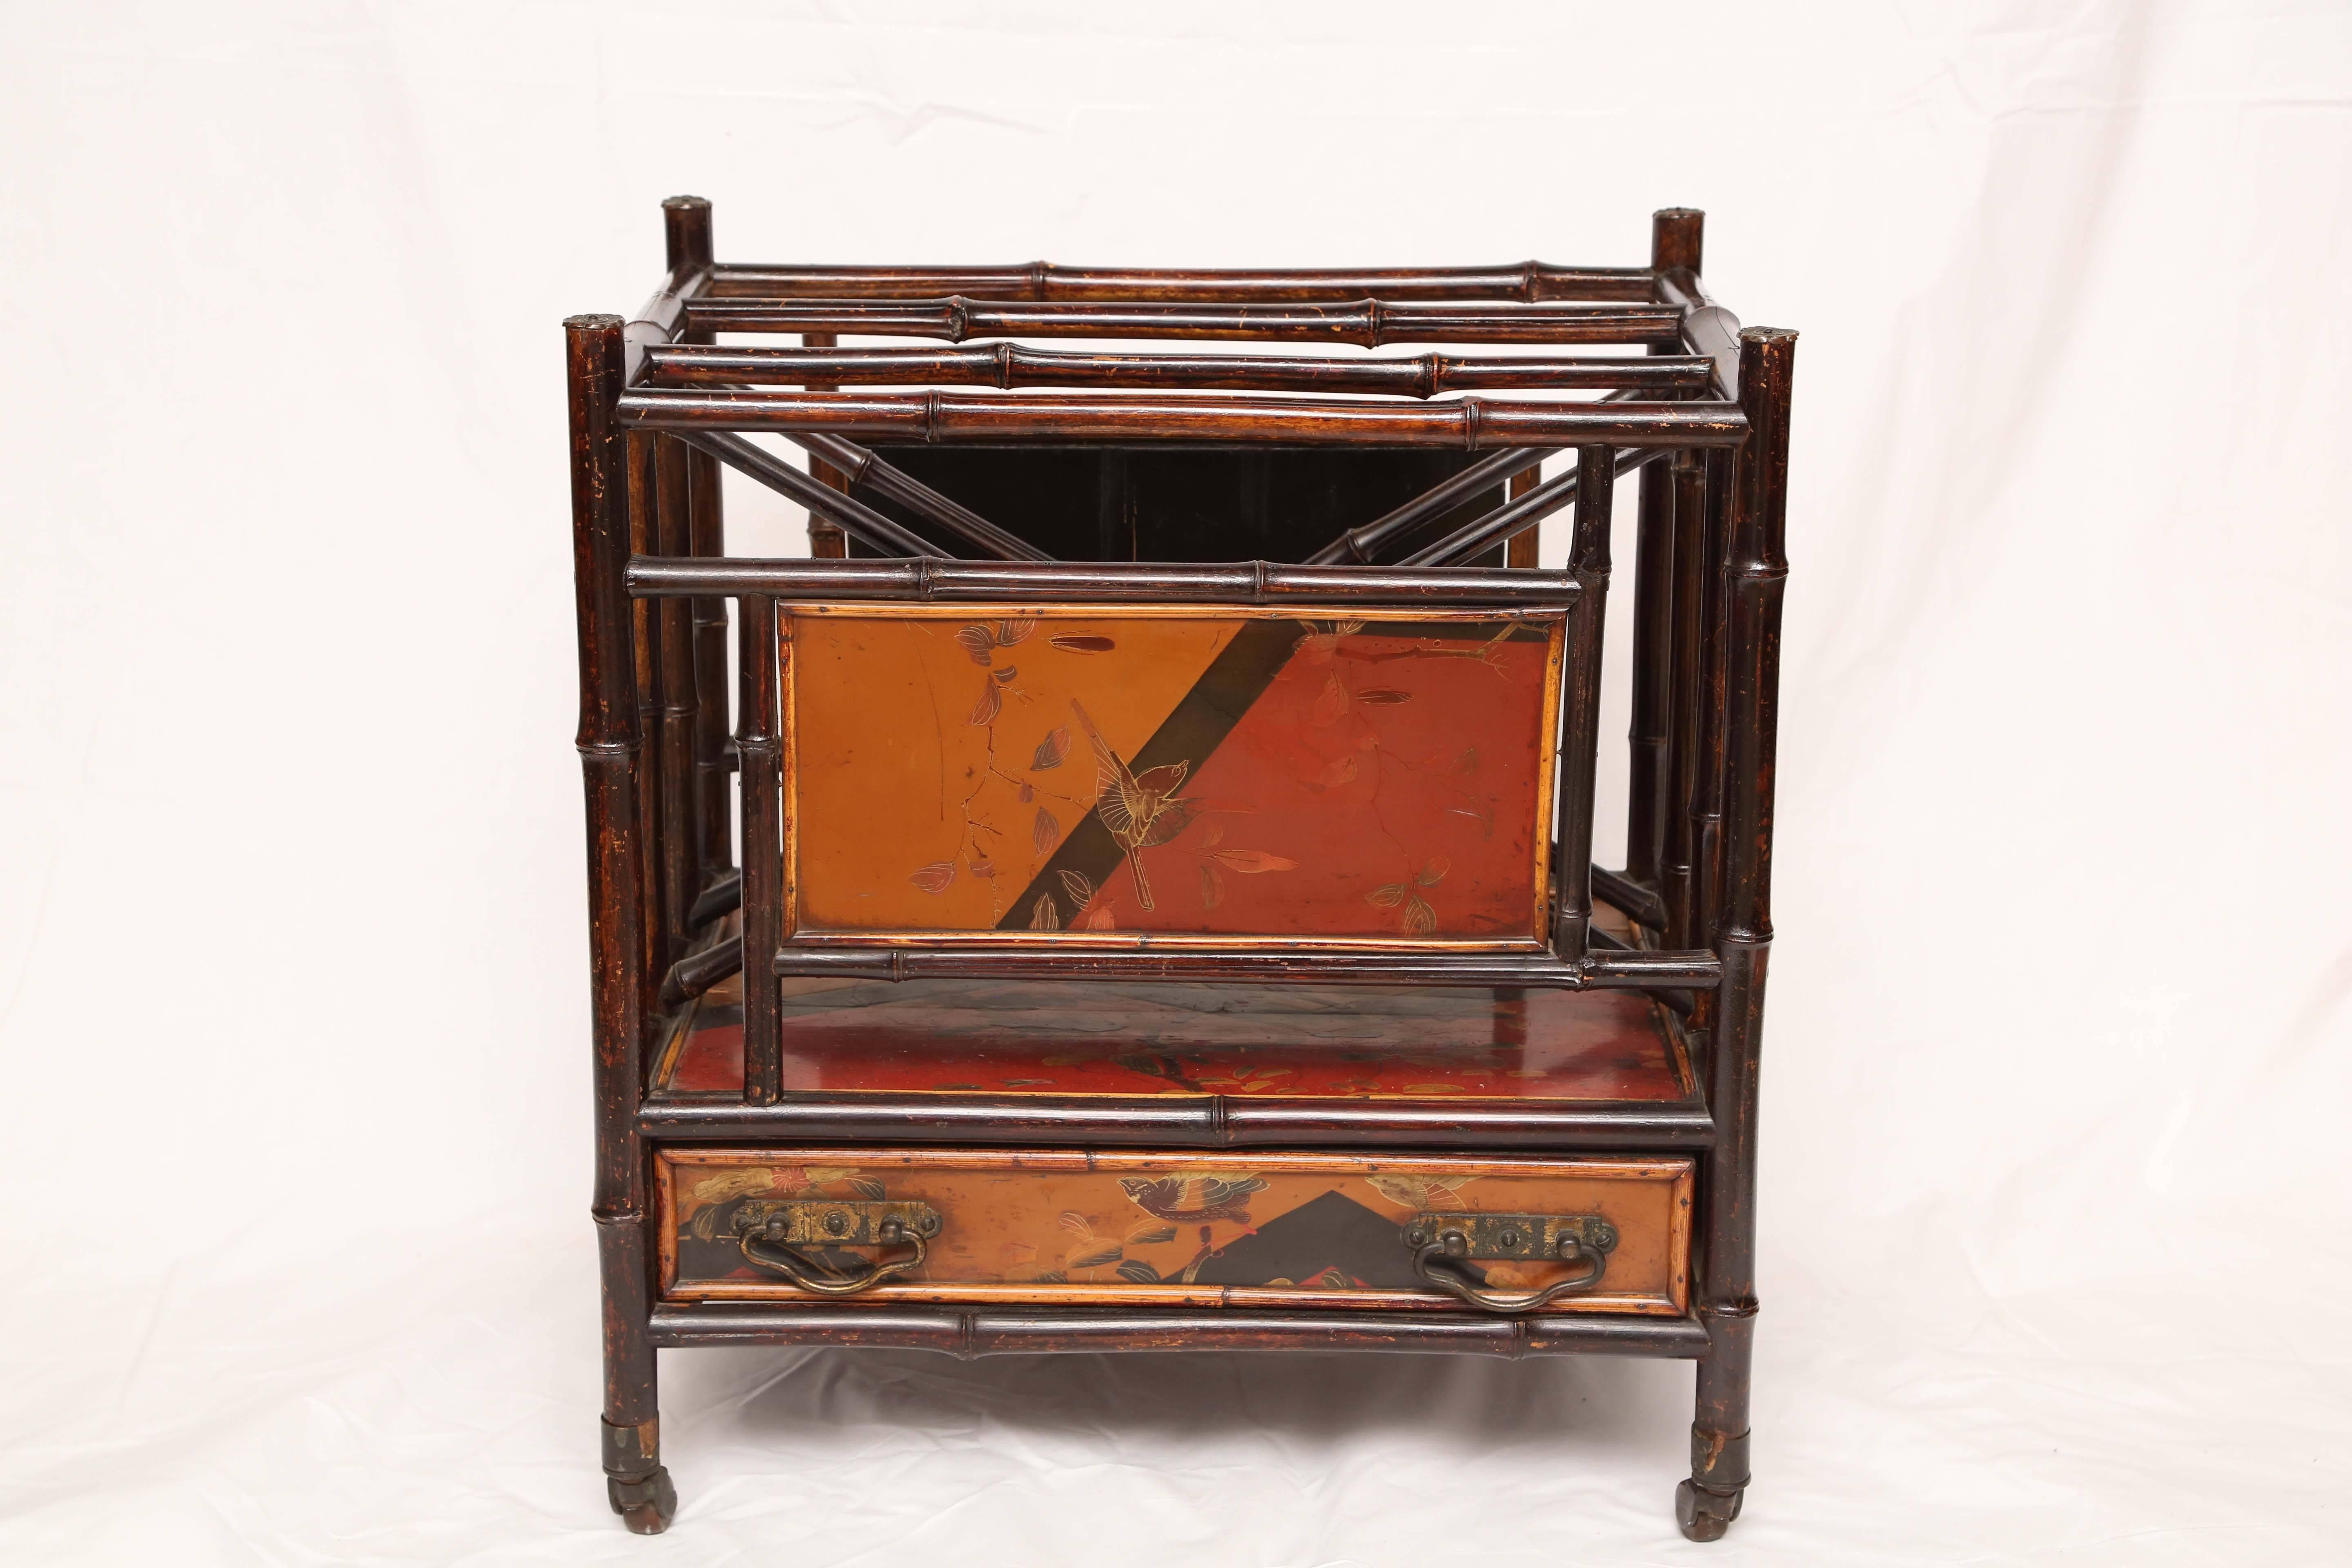 19th century English bamboo Canterbury magazine rack on wheels with one drawer and lacquer japanning all-over.